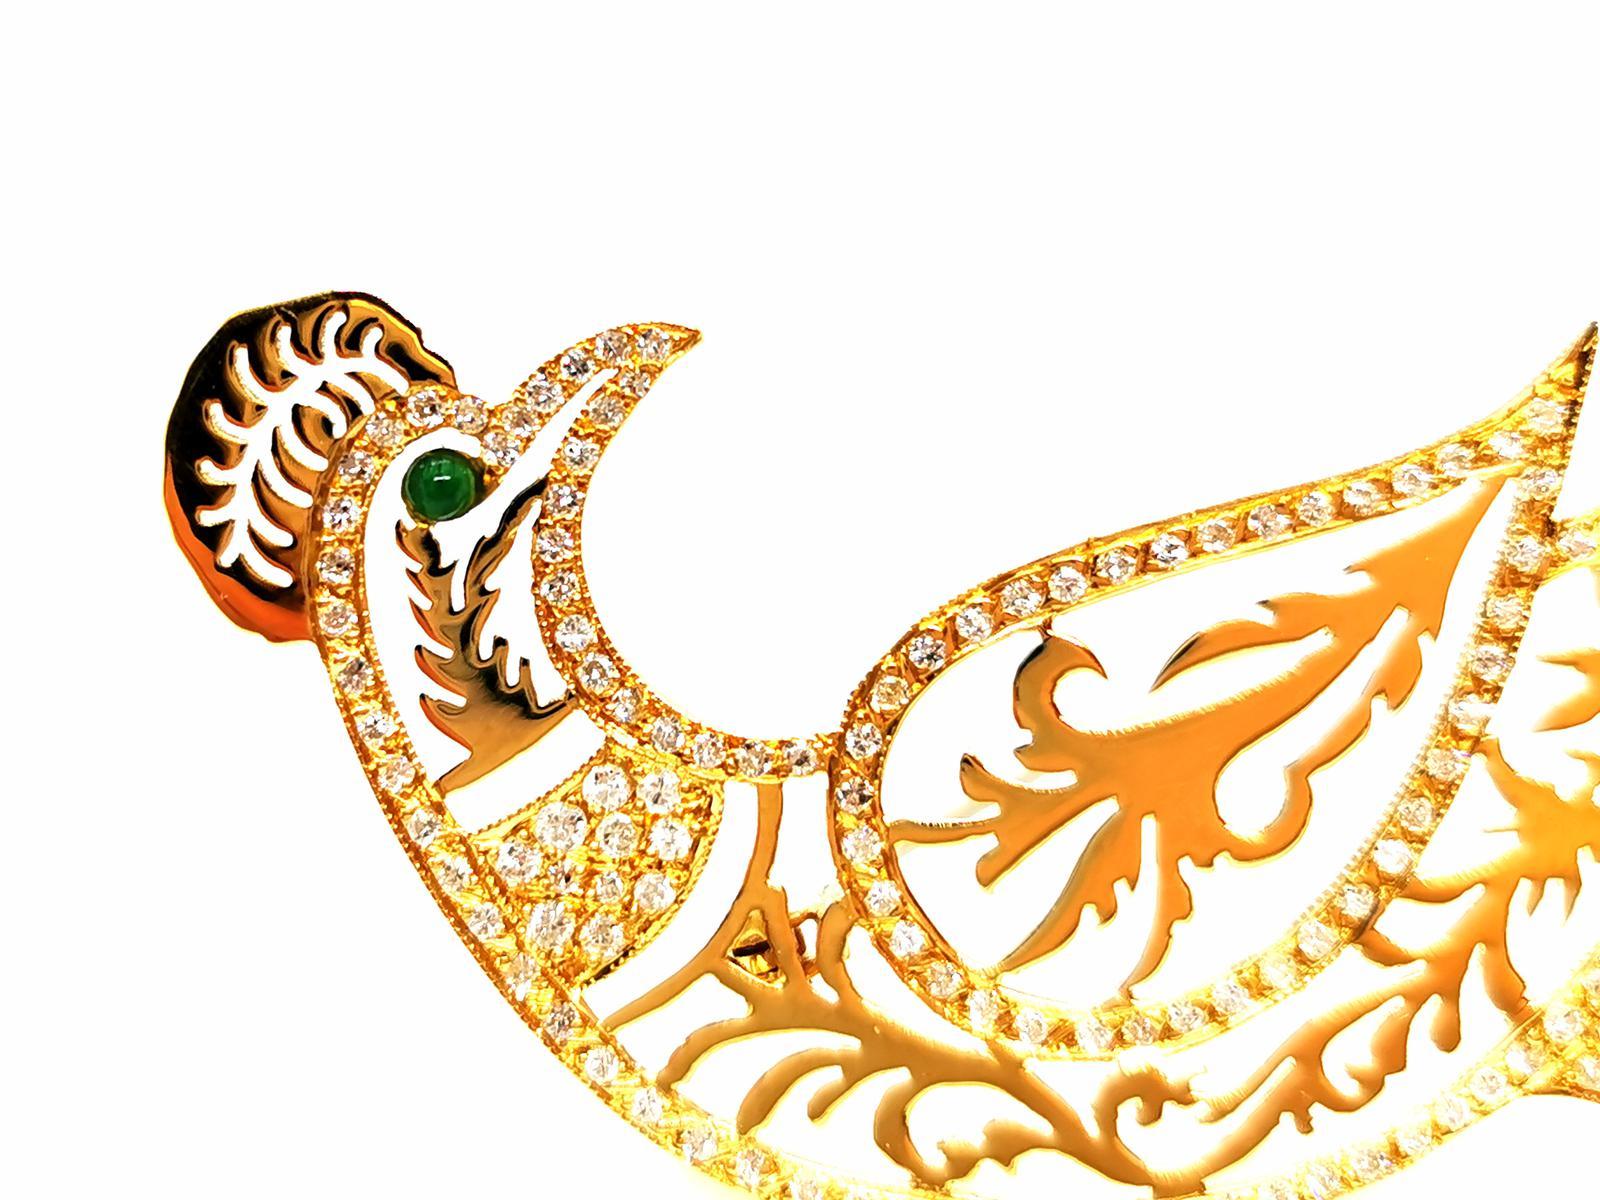 Brooch in yellow gold 750 thousandths (18 carats). peacock pattern. set with 164 diamonds. brilliant cut. total weight diamonds: about 1.476 ct. peacock eye set with an emerald. cut in cabochon of about 0.05 ct. dimensions: 6.33 cm X 5.36 cm.